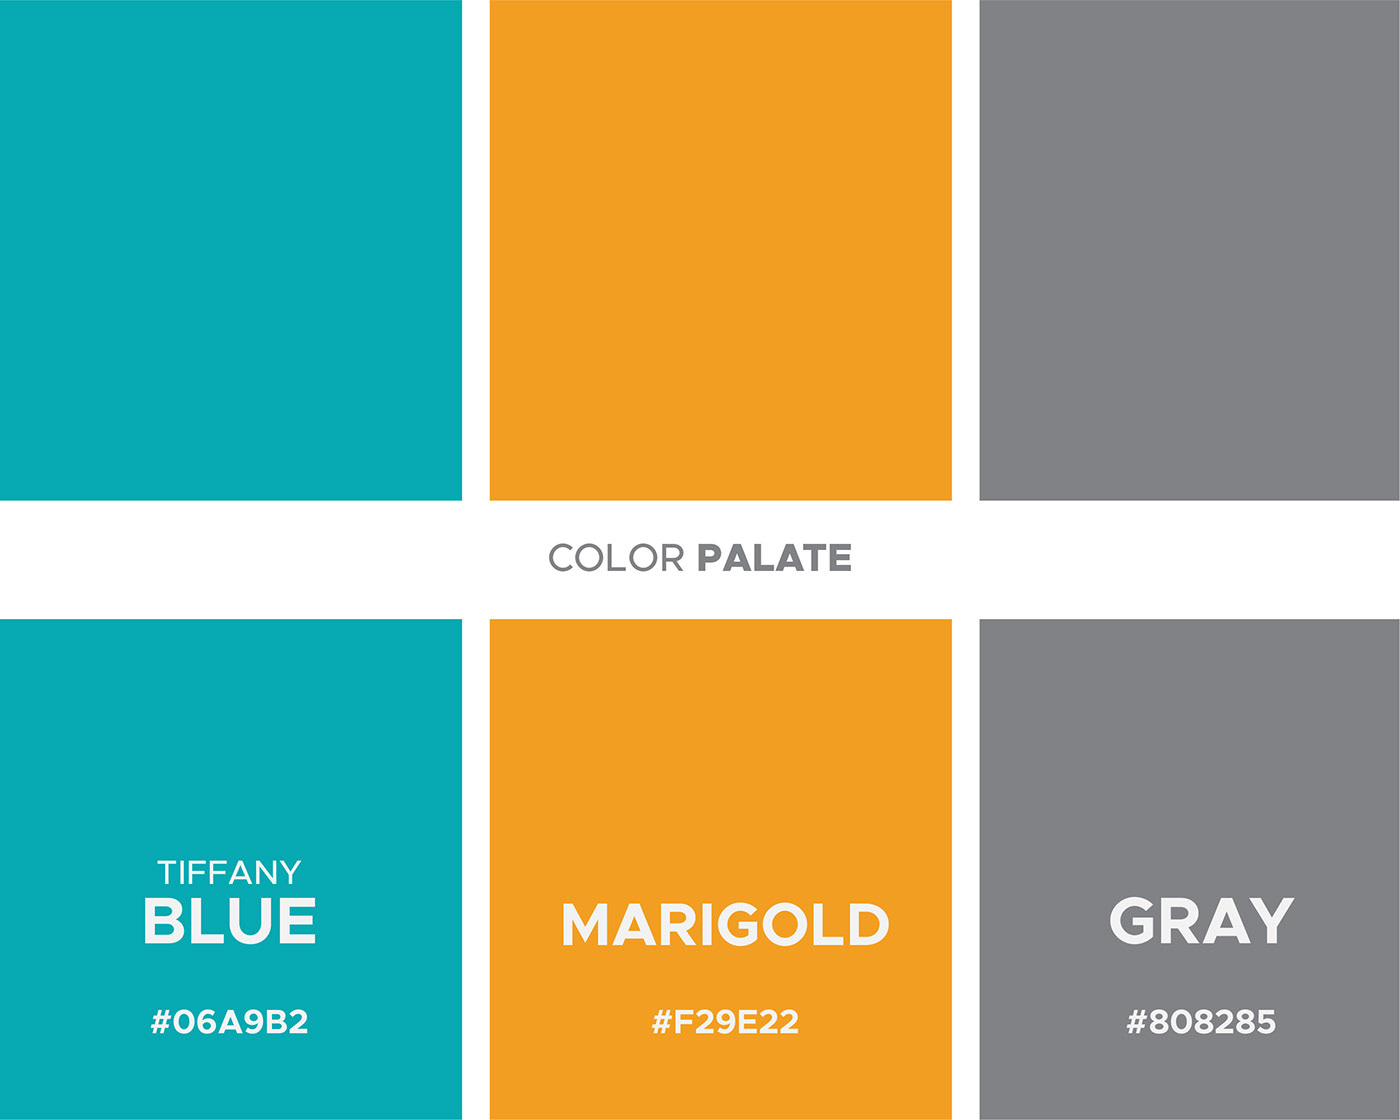 This is color palate. This is a medical logo design included plus sign.